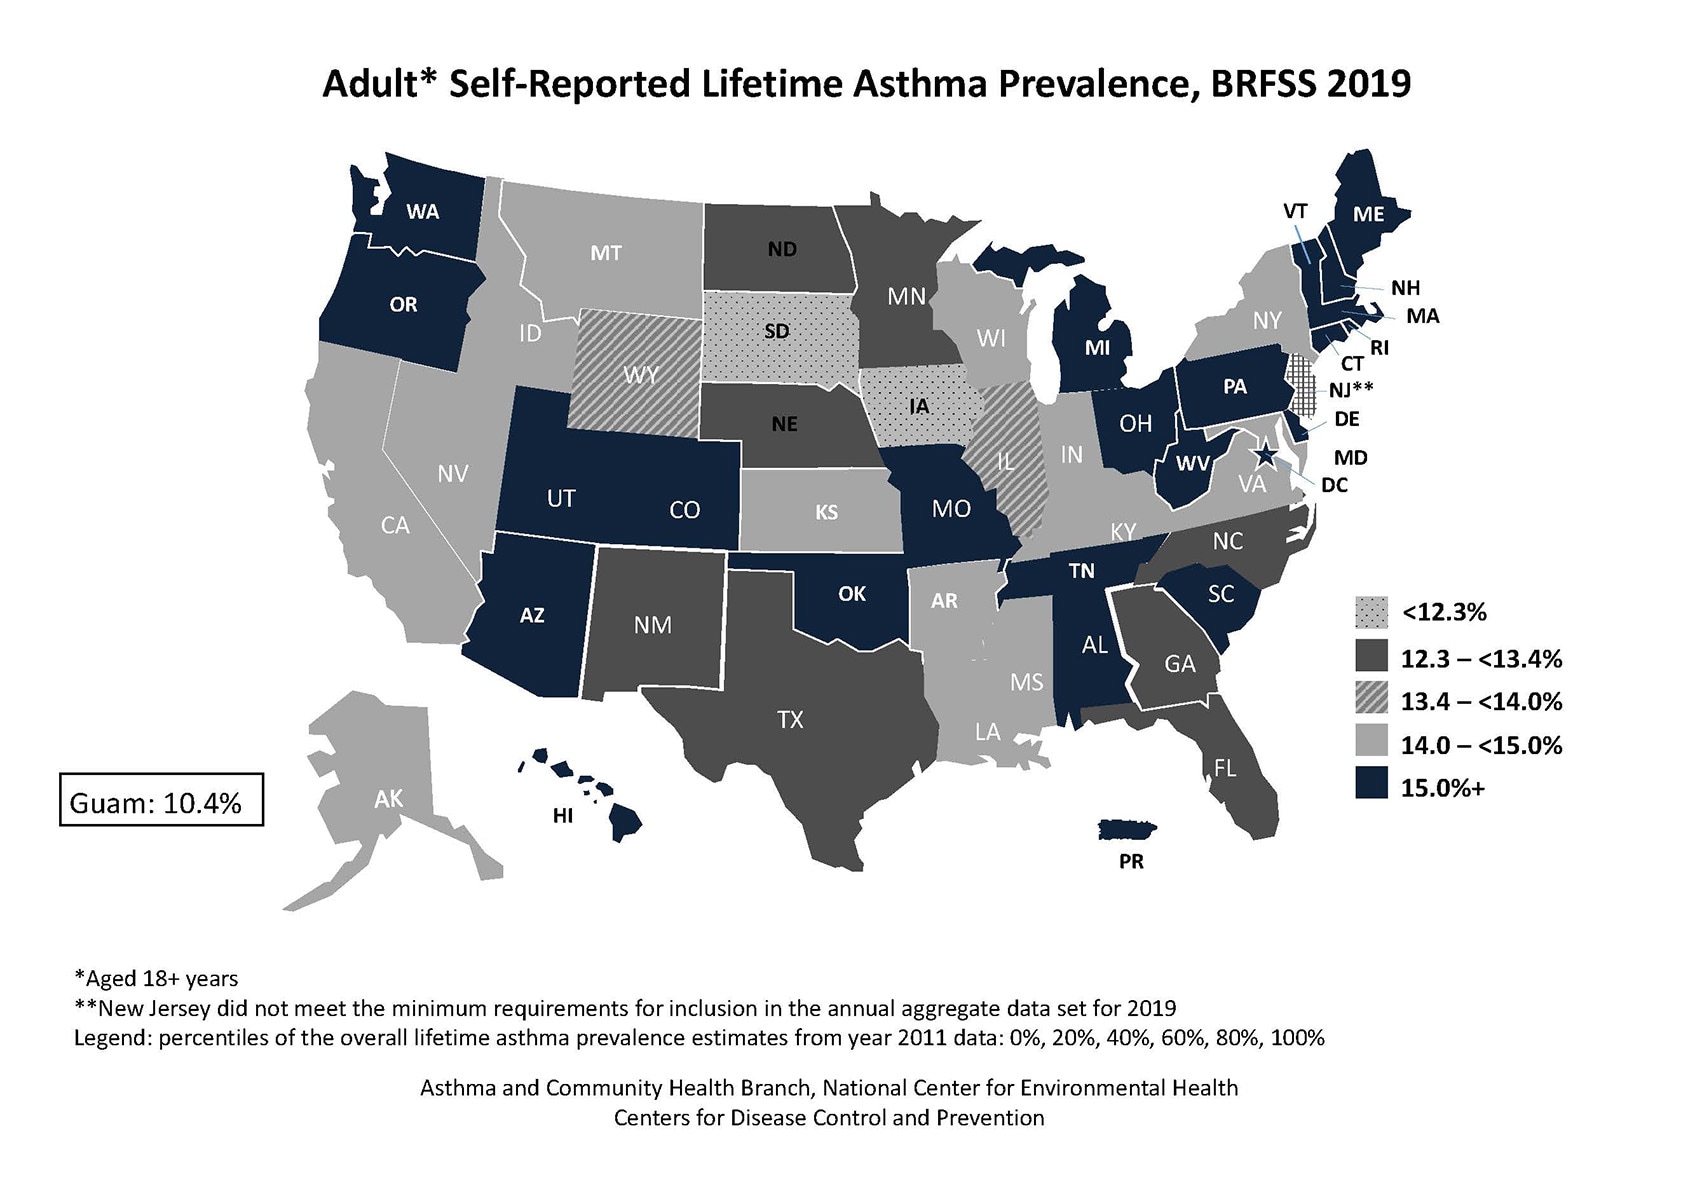 Black and white U.S. map showing adult self-reported lifetime asthma prevalence by state for BRFSS 2019